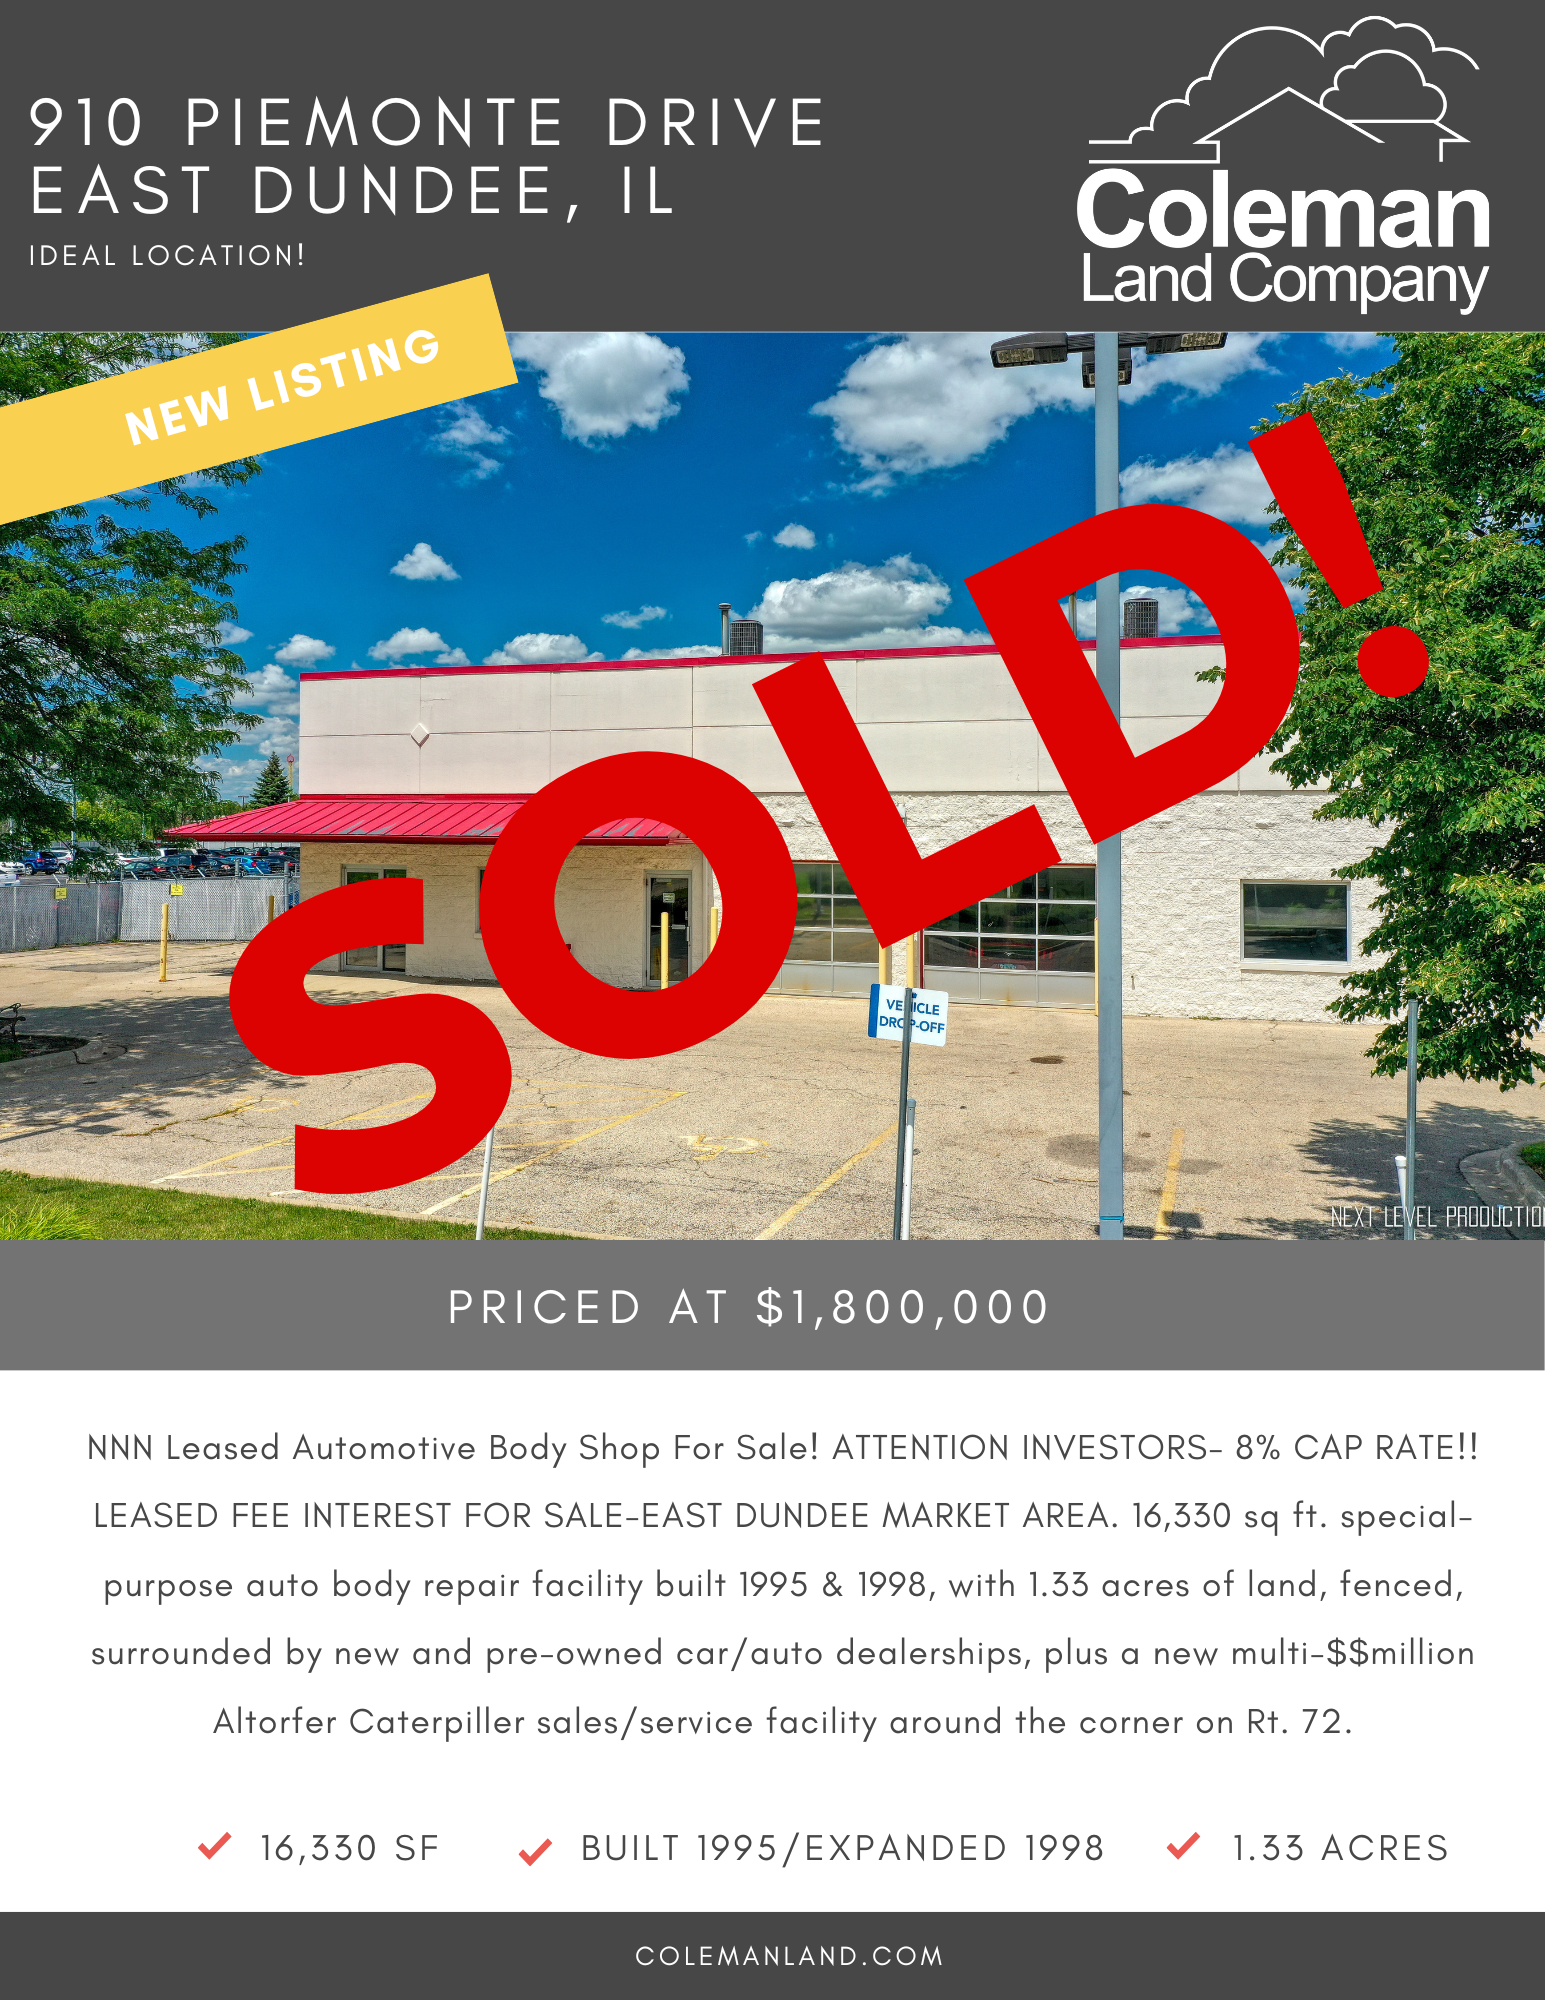 SOLD - Fully Leased Investment Opportunity - January 31, 2023